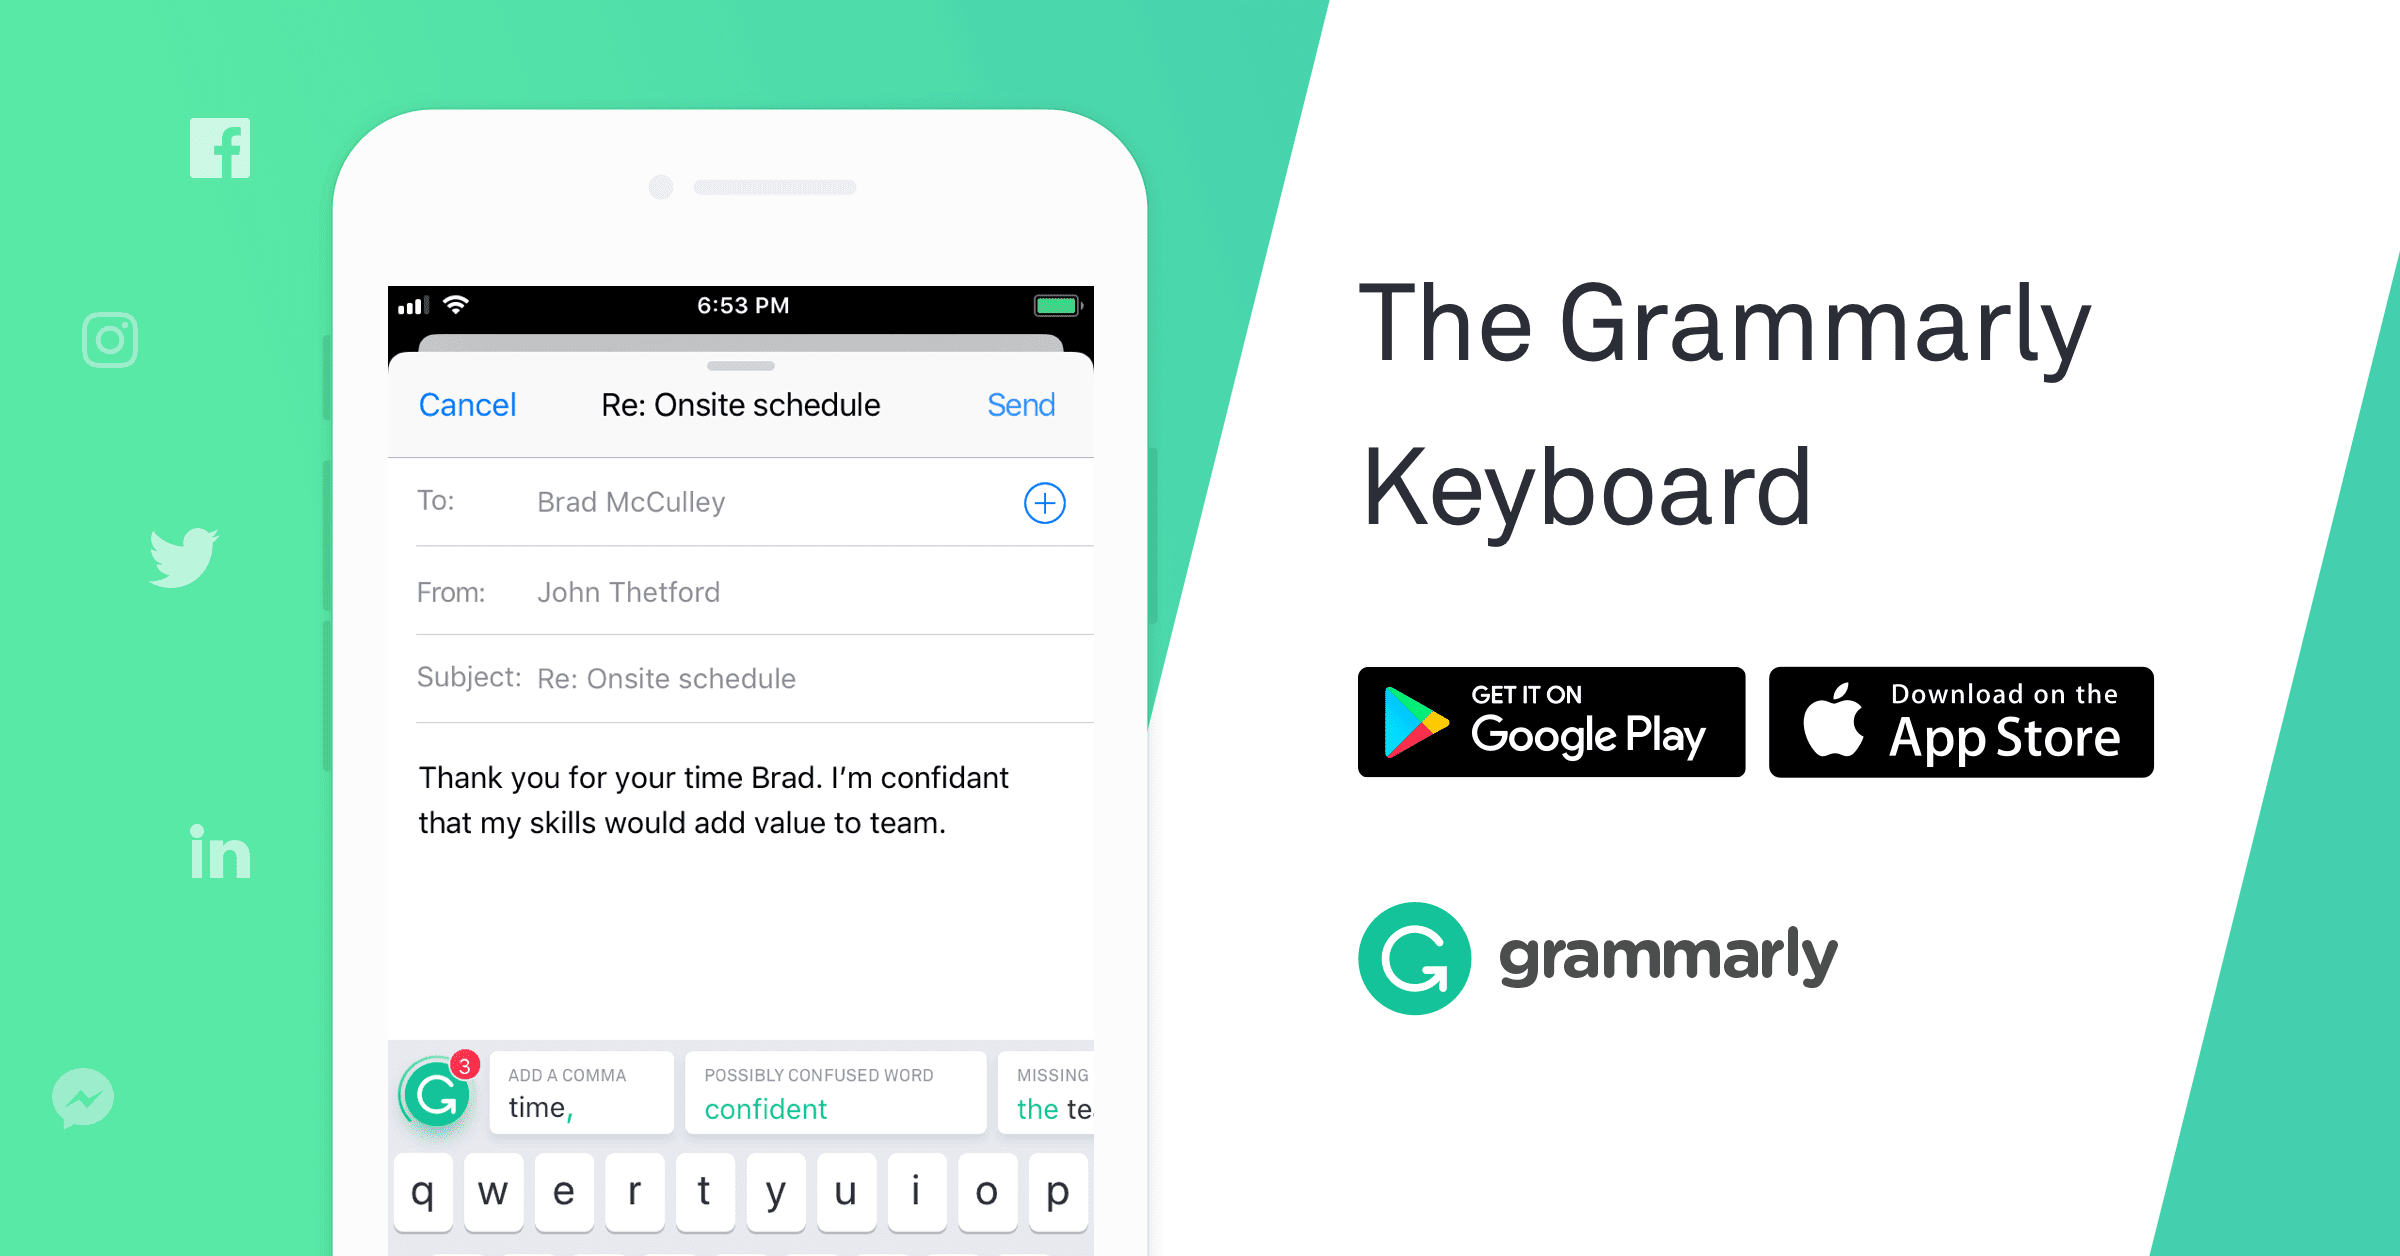 can you get a grammarly free trial